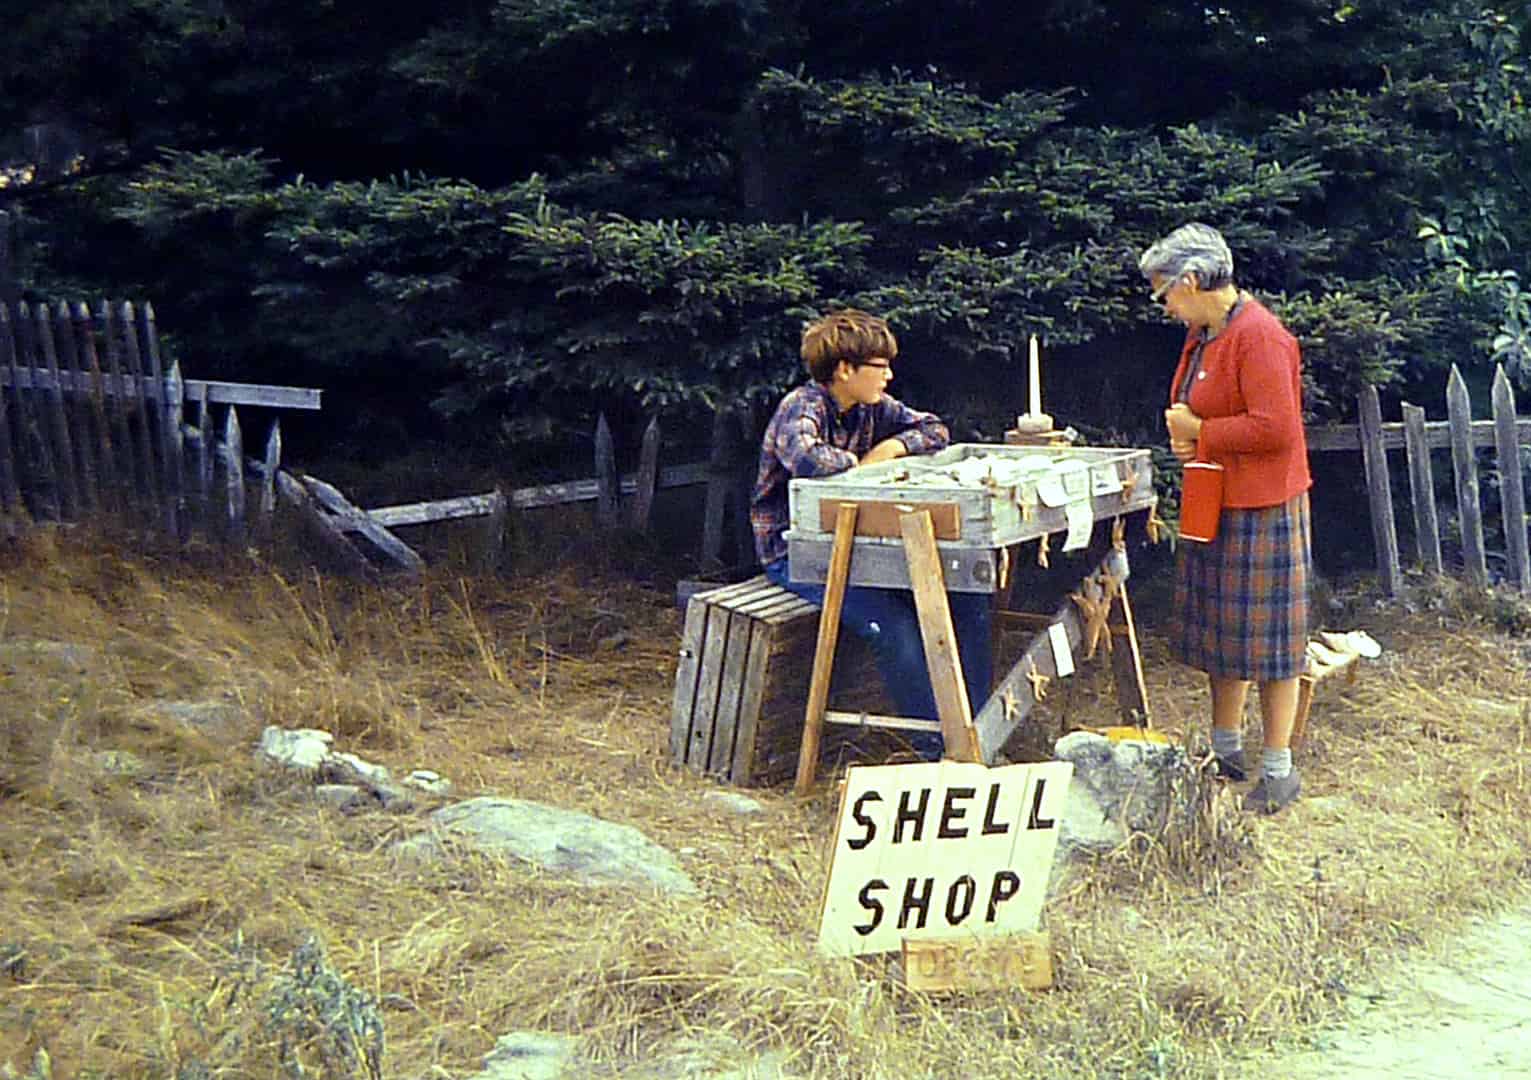 boy selling shells to an older woman